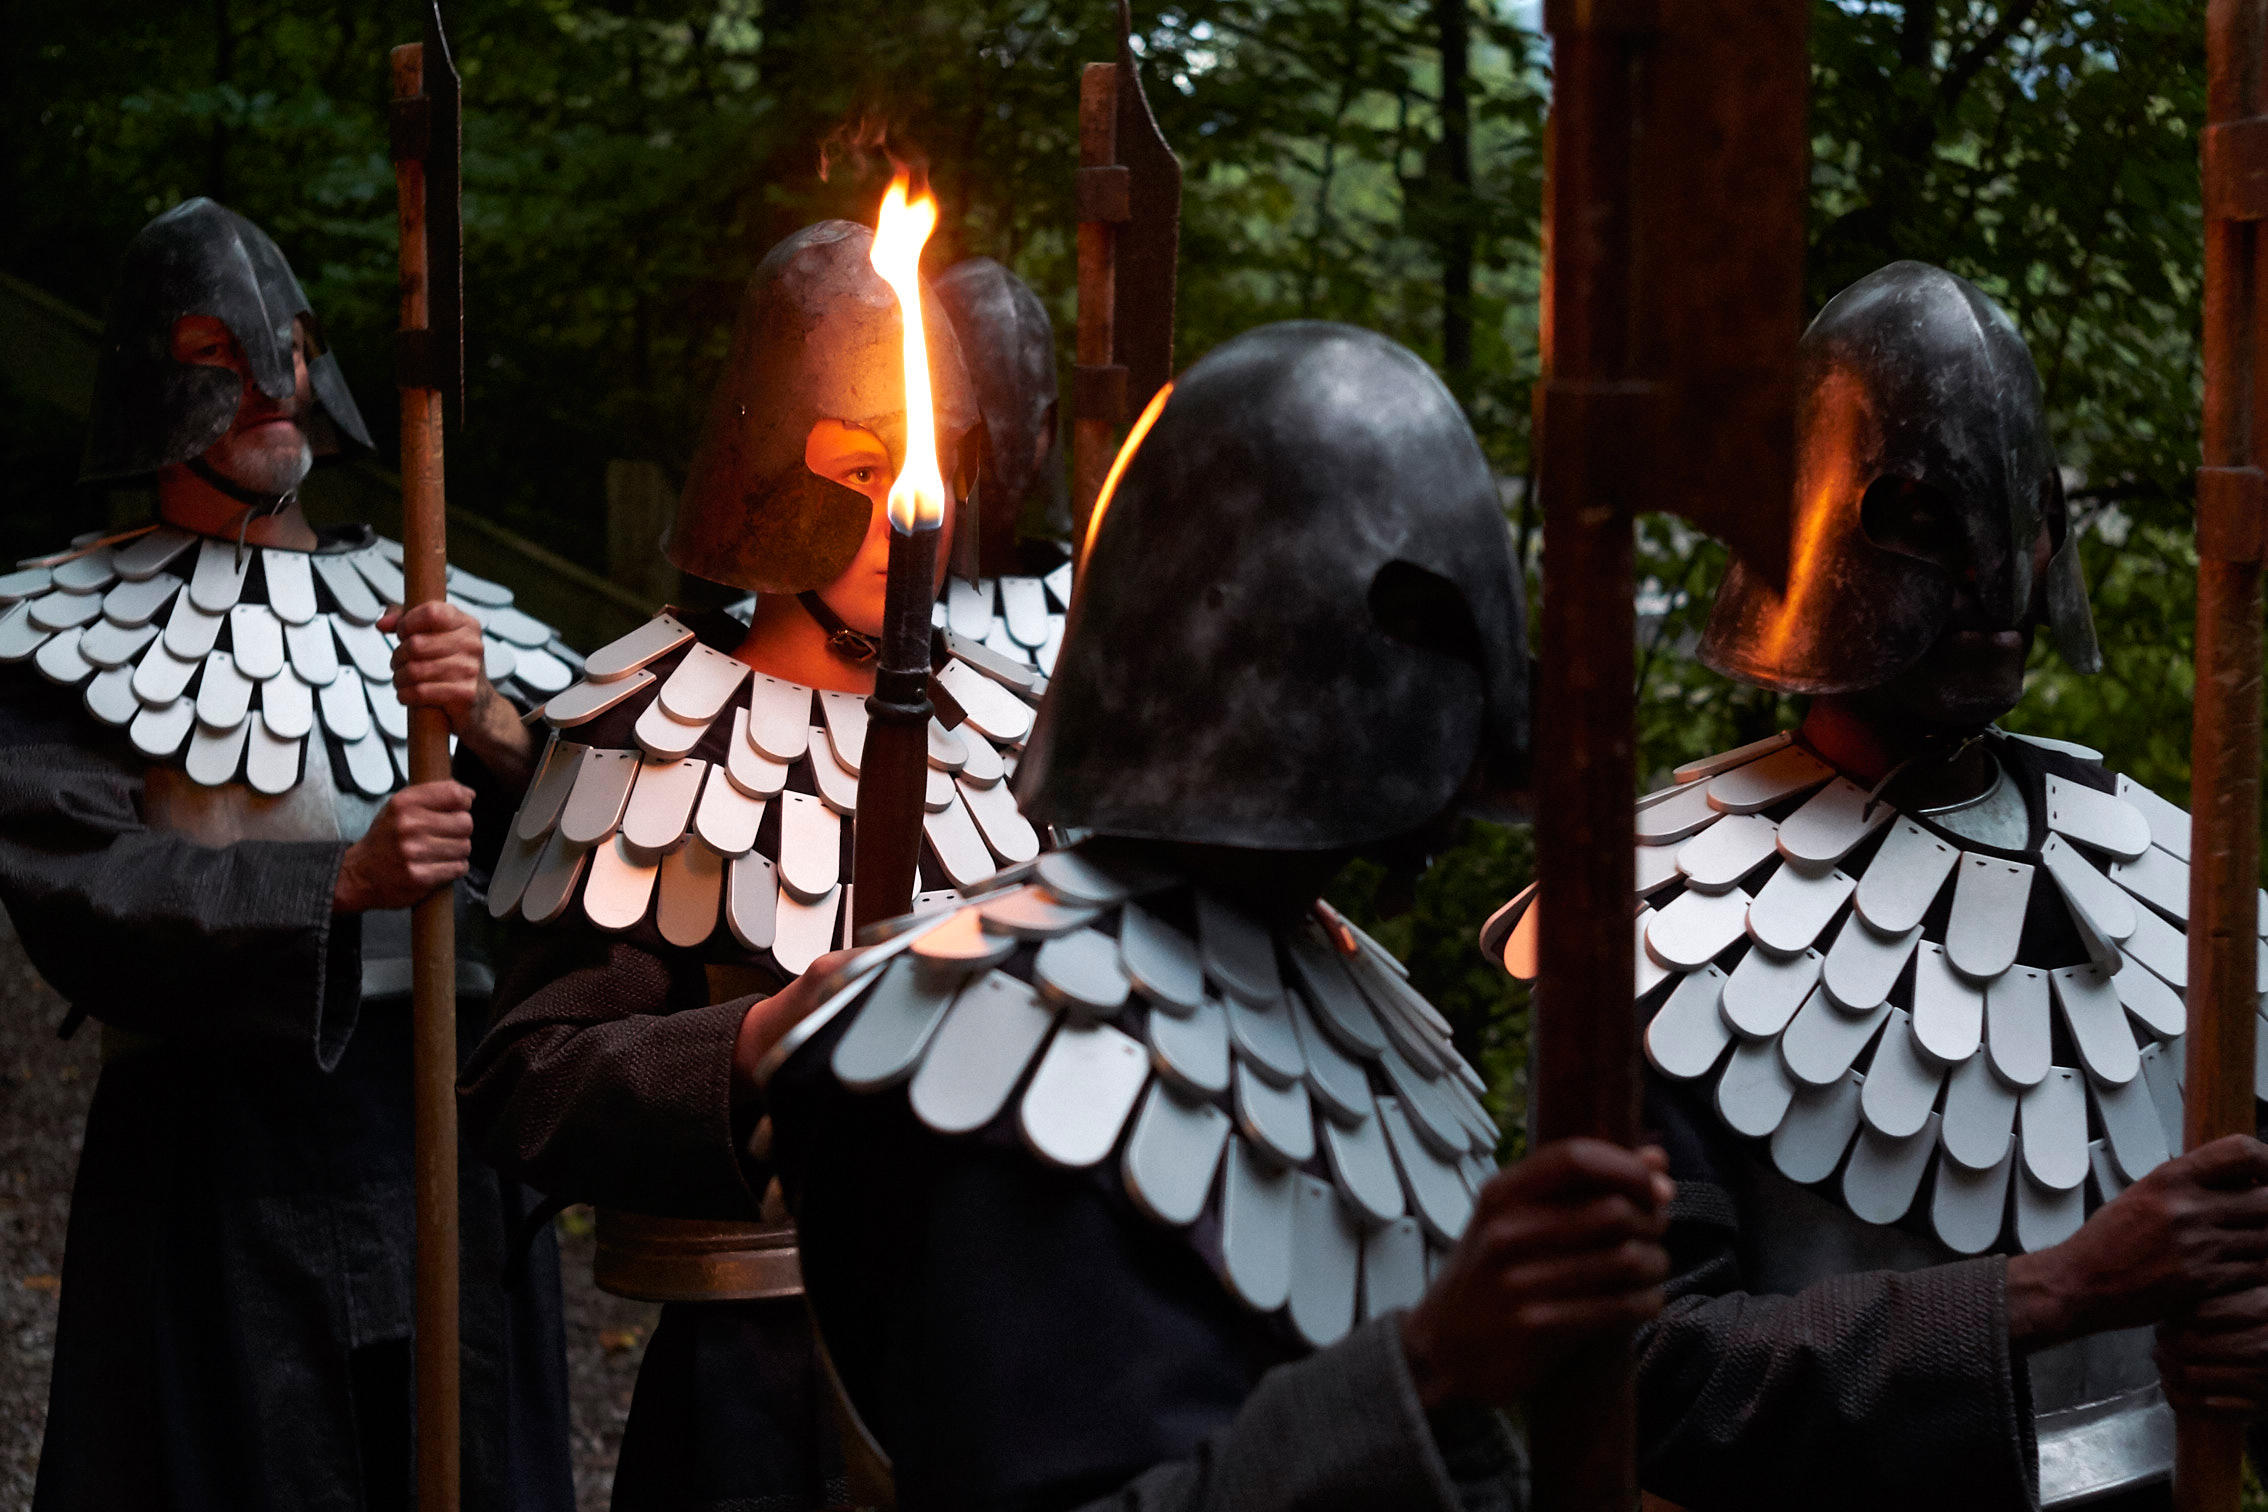 Actors dressed as soldiers bearing flaming torches